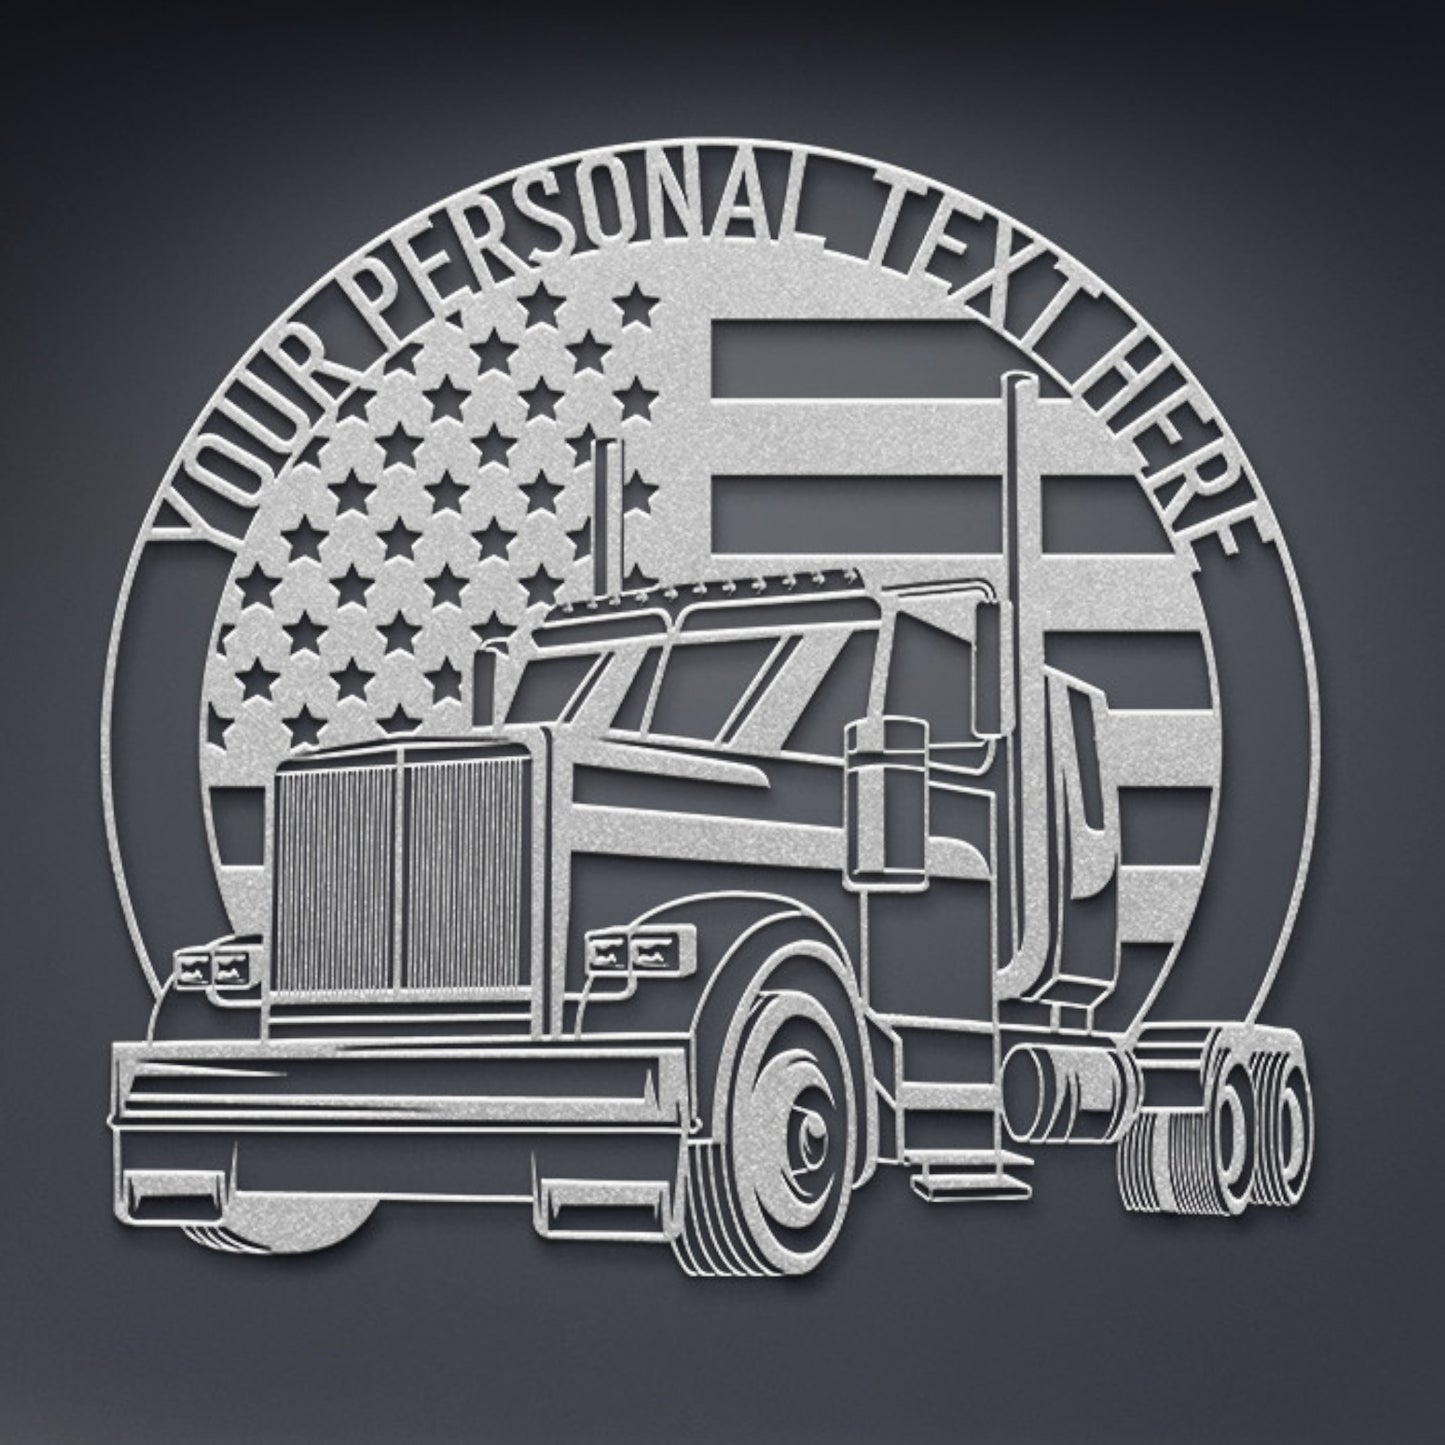 Personalized US Trucker Metal Sign Gift. Personal Patriotic Truck Owner. Lorry Driver Wall Decor. US 18 Wheeler Custom Truck Wall Hanging